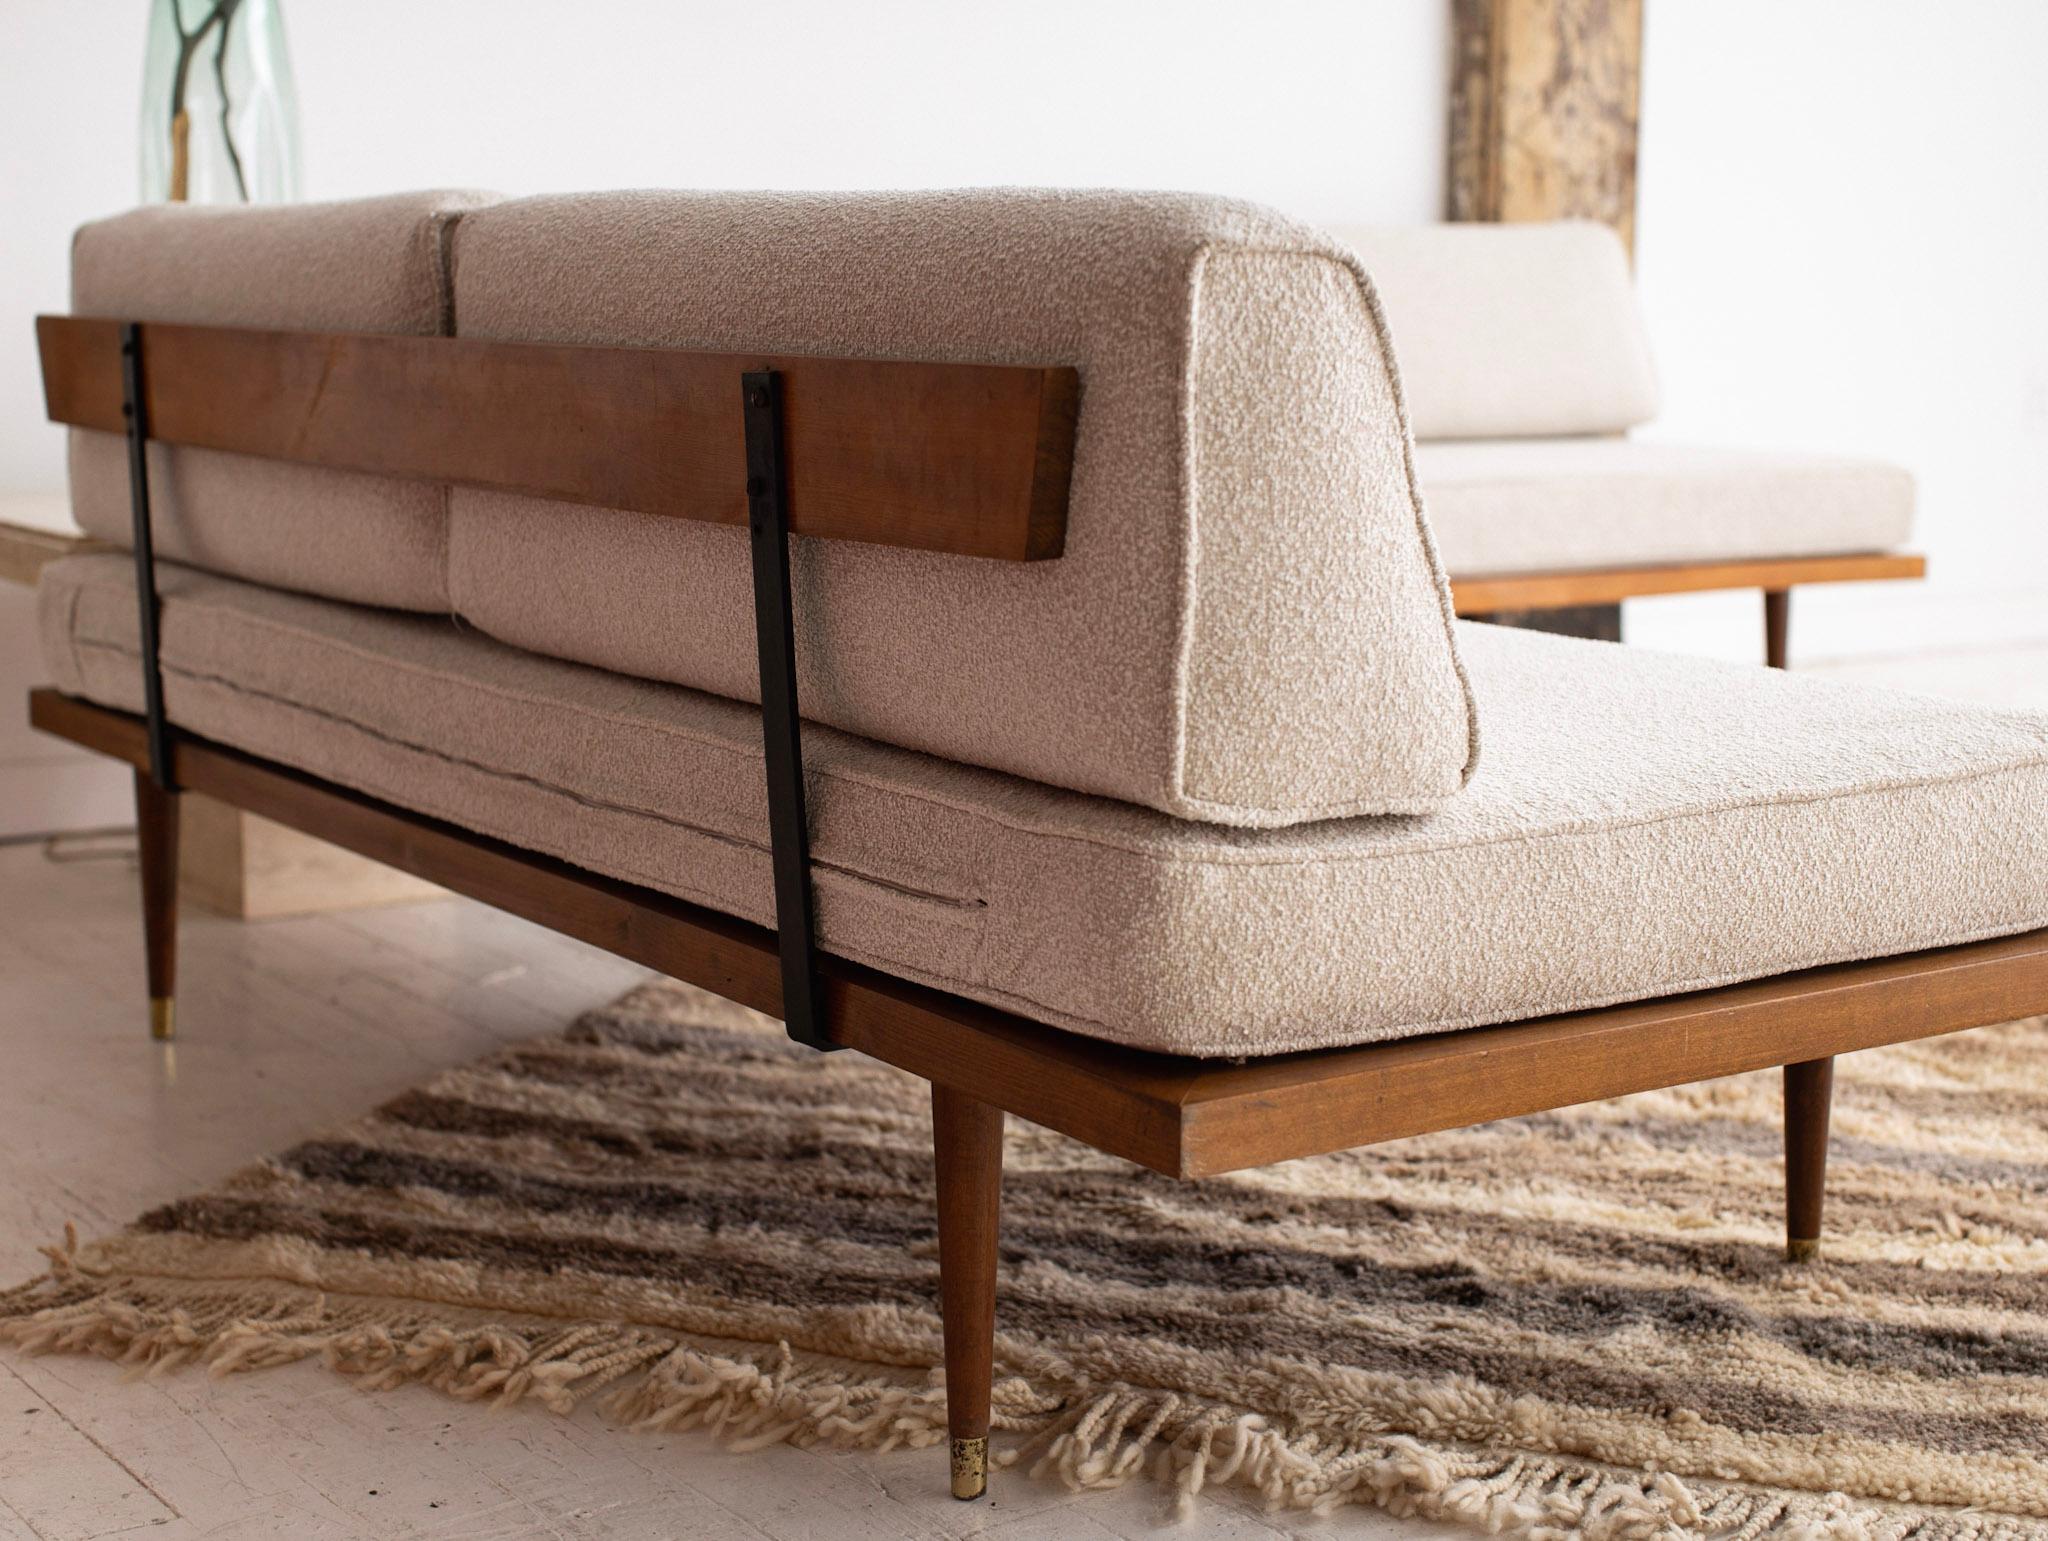 Mid-Century Modern Day Bed in Textured Cream Upholstery 2